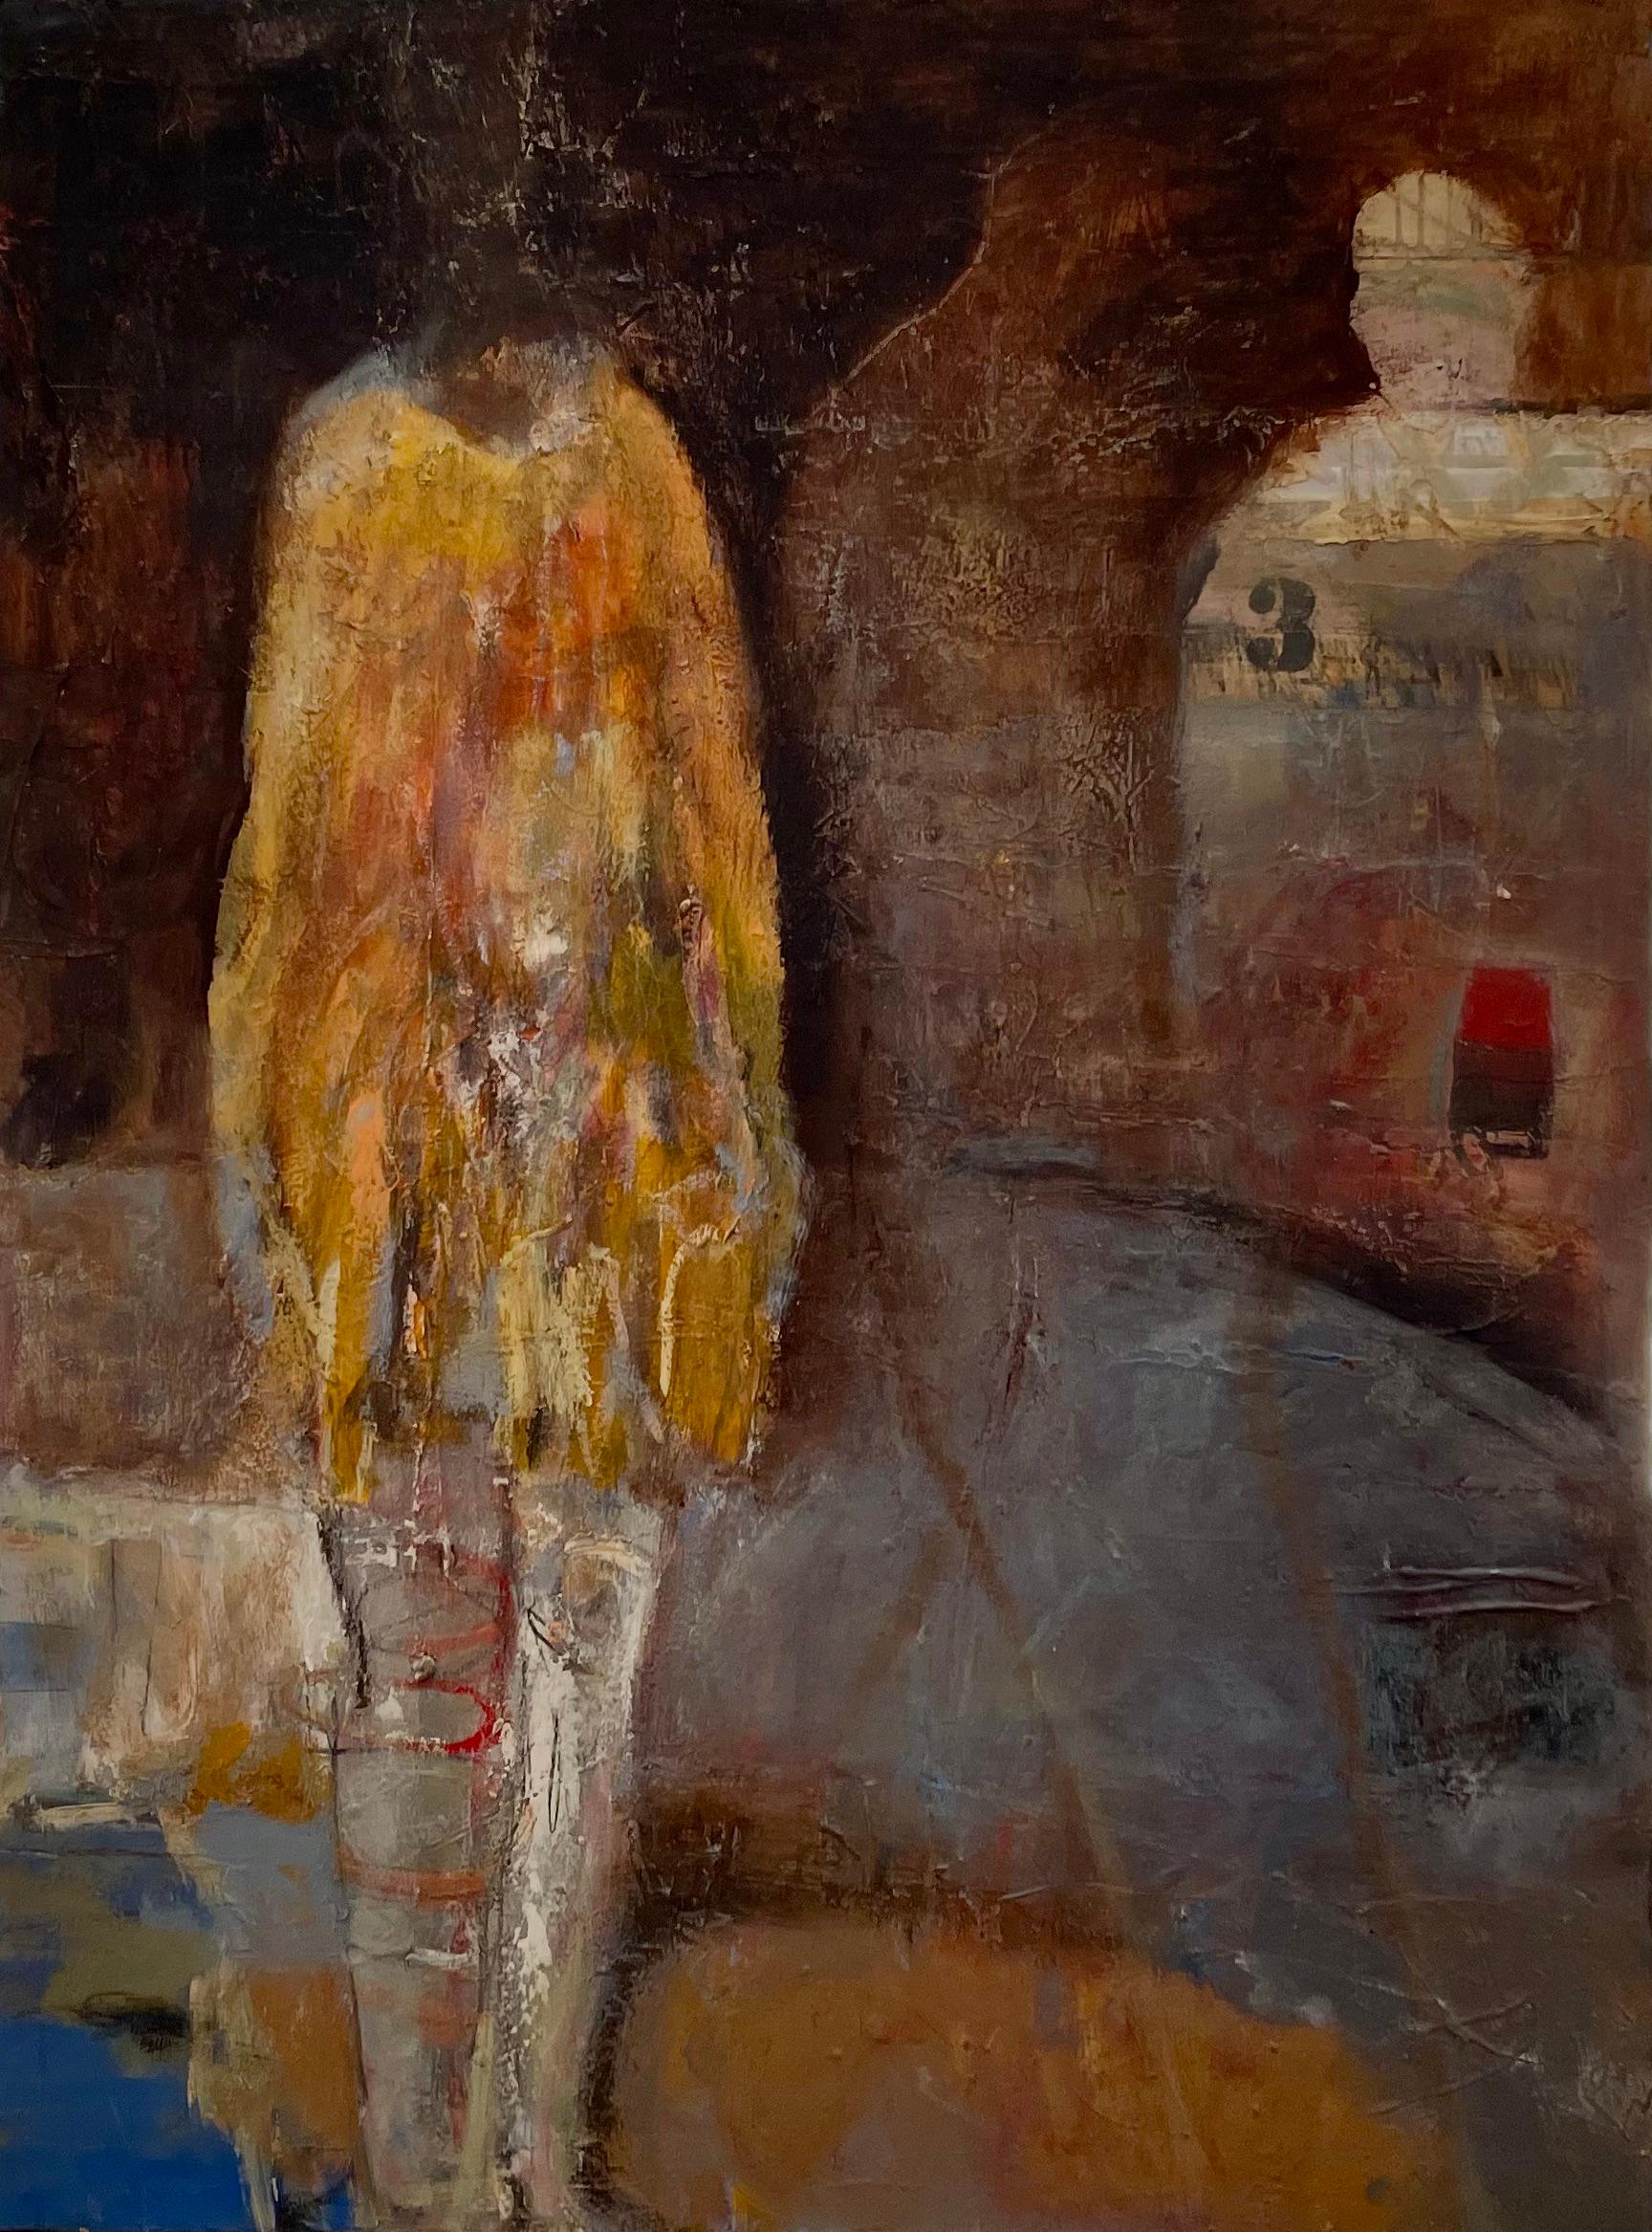 Figurative Painting Helen Steele - "Lost" Mixed Media Contemporary Figurative Abstract Expressionist 